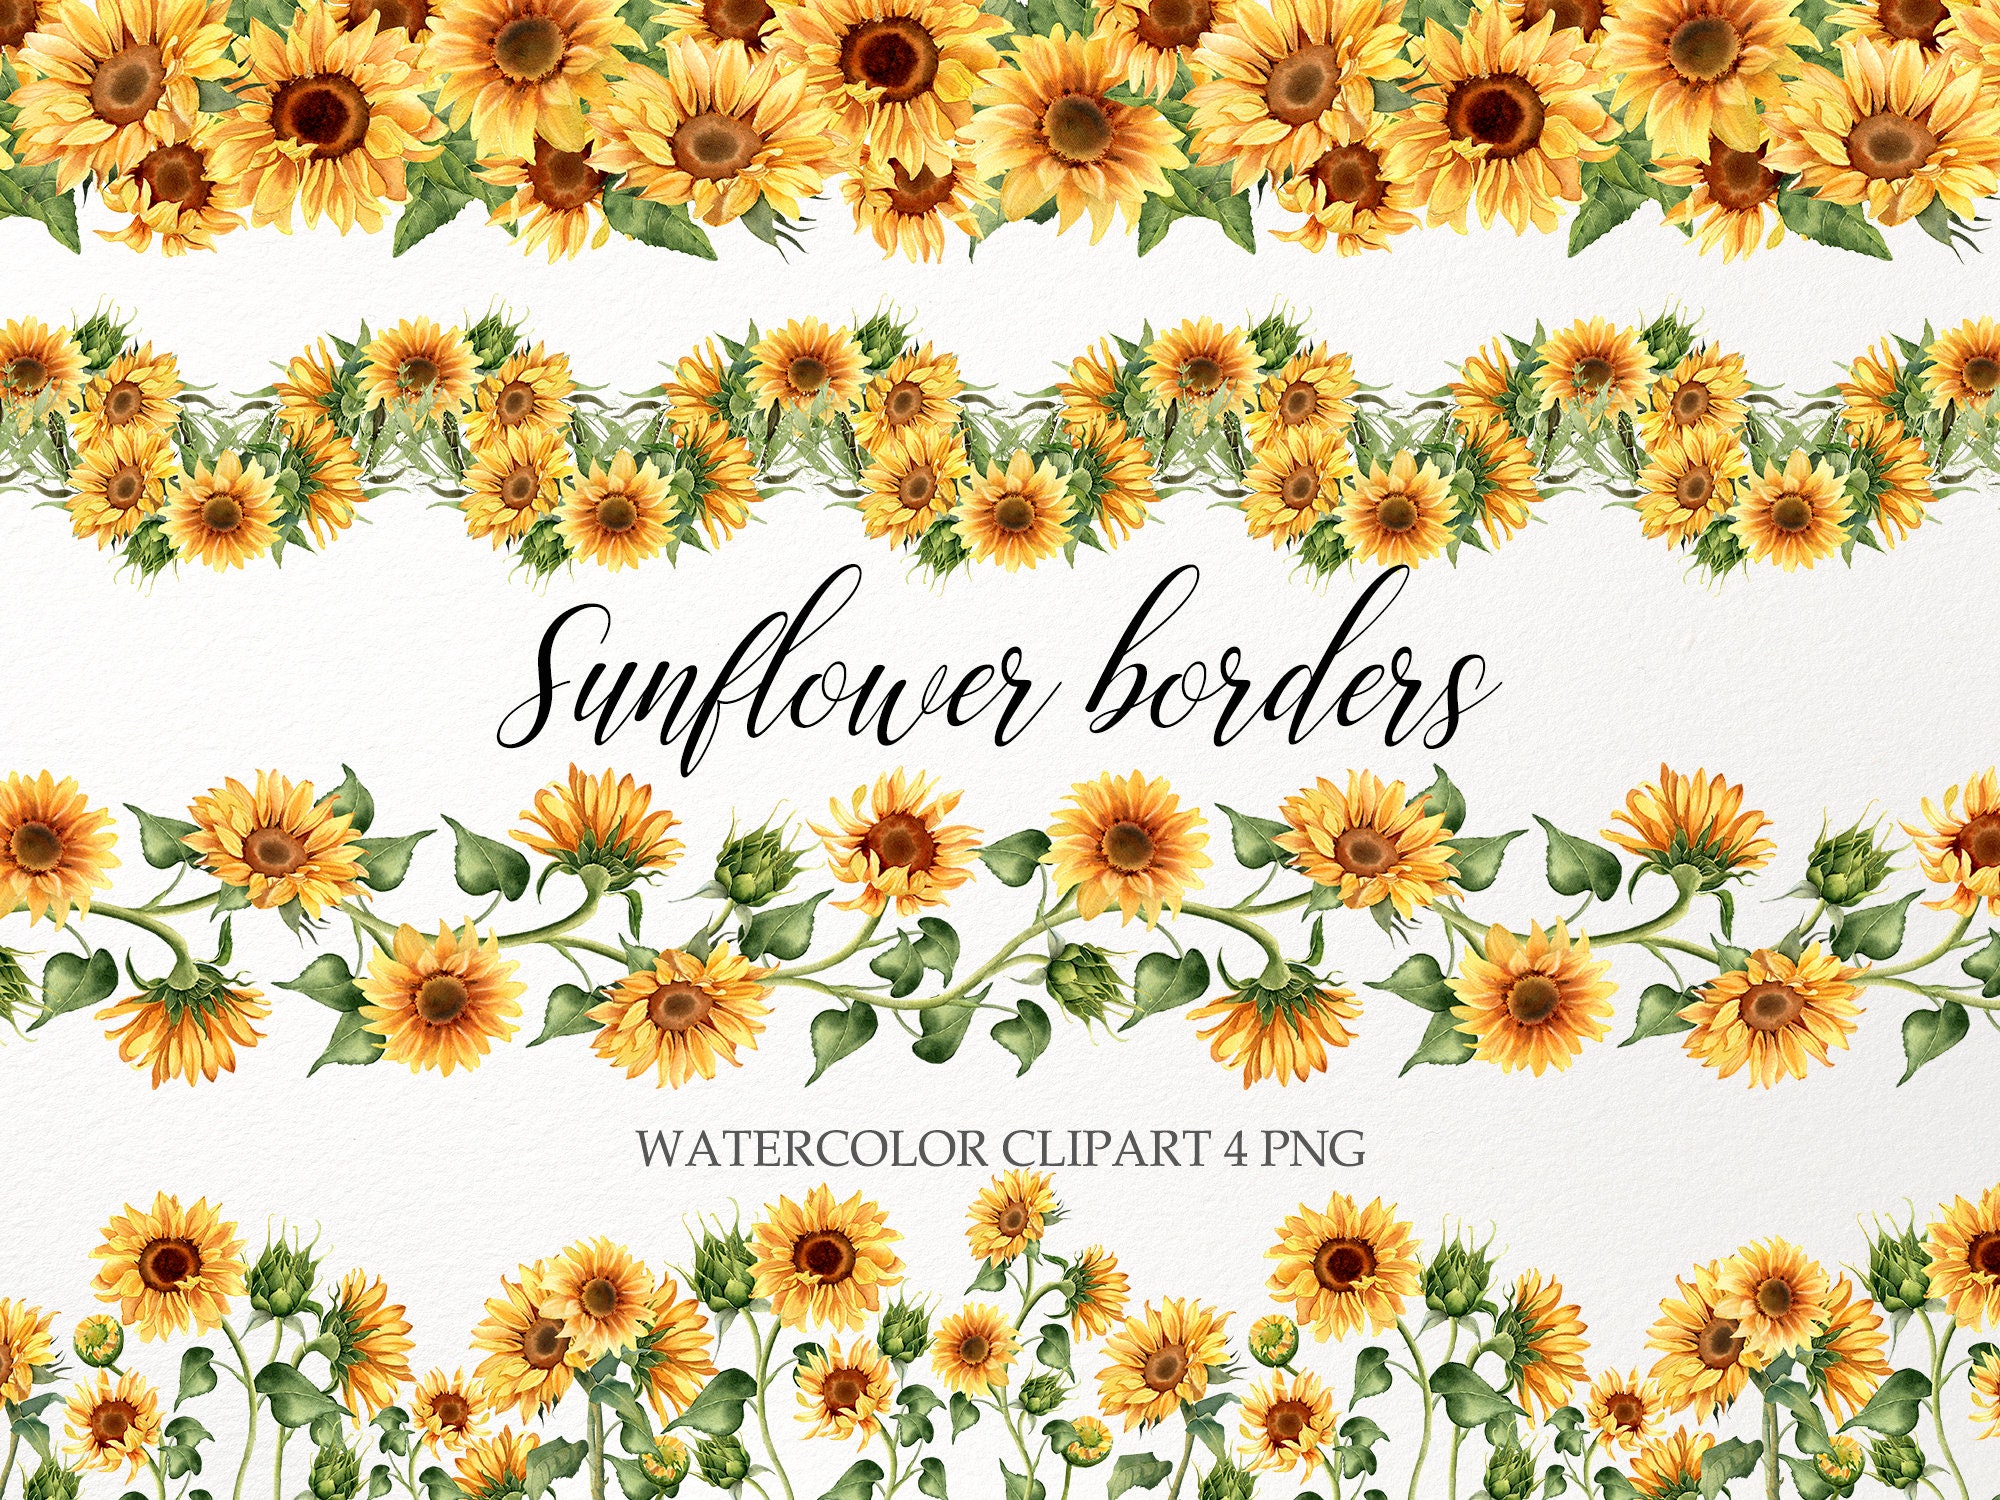 Sunflowers Rug yellow colorful floral rugs 2x3 3x5 4x6 5x7 8x10 large –  Celesky Designs